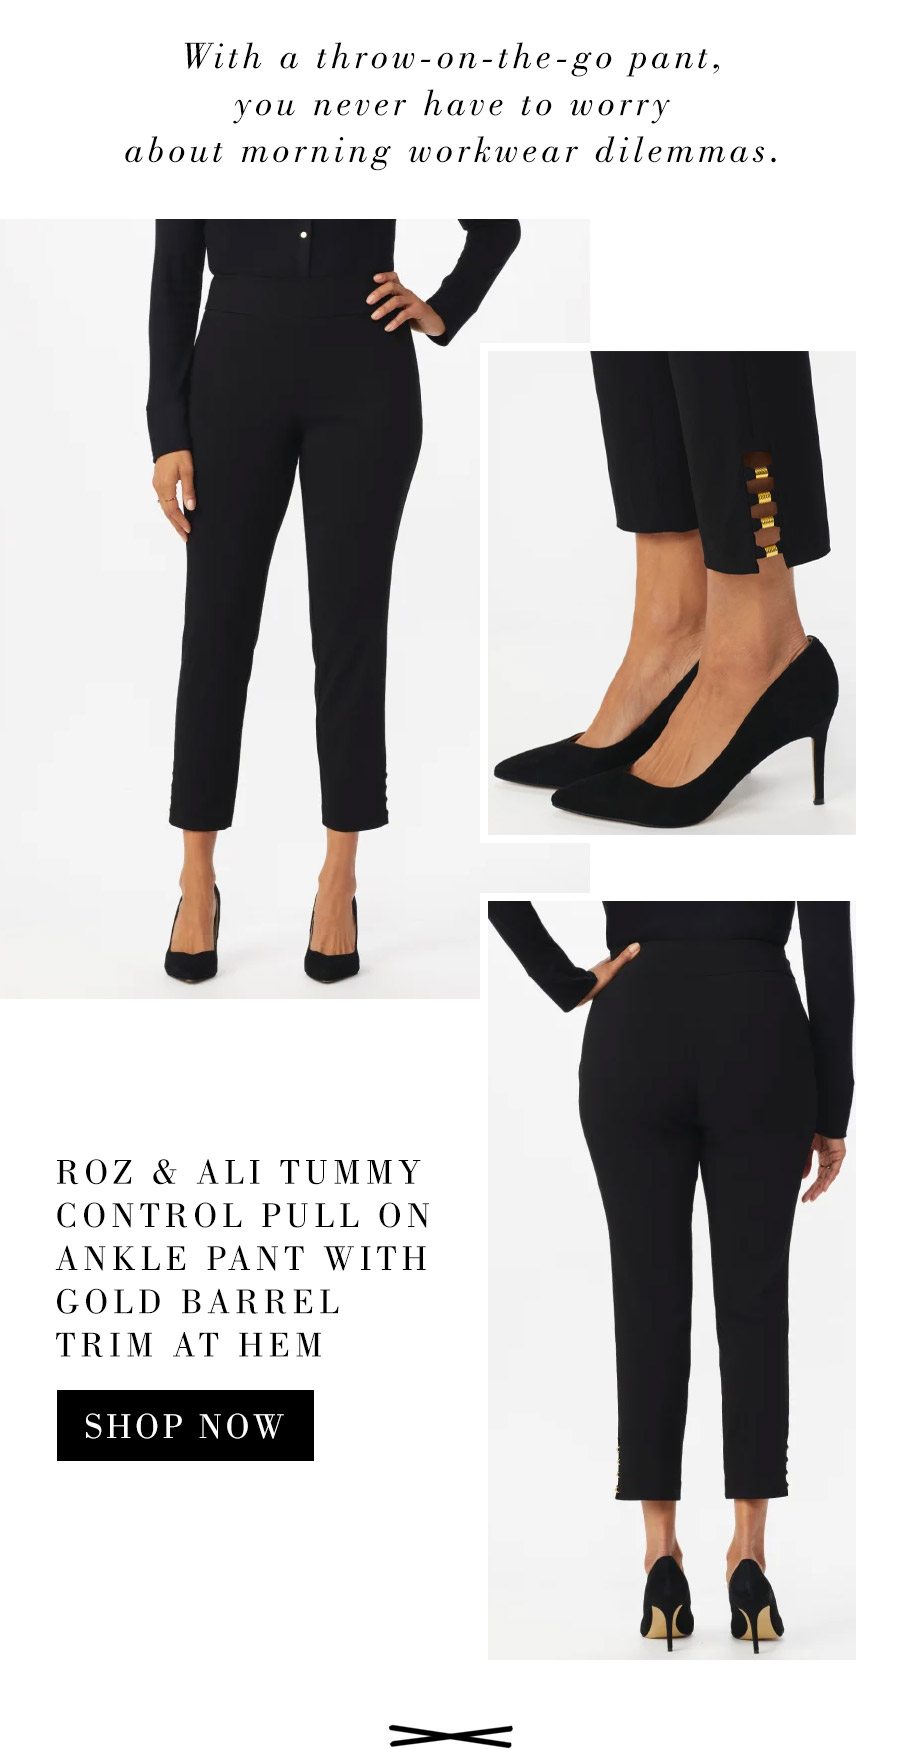 ROZ & ALI TUMMY CONTROL PULL ON ANKLE PANT WITH GOLD BARREL TRIM AT HEM - MISSES